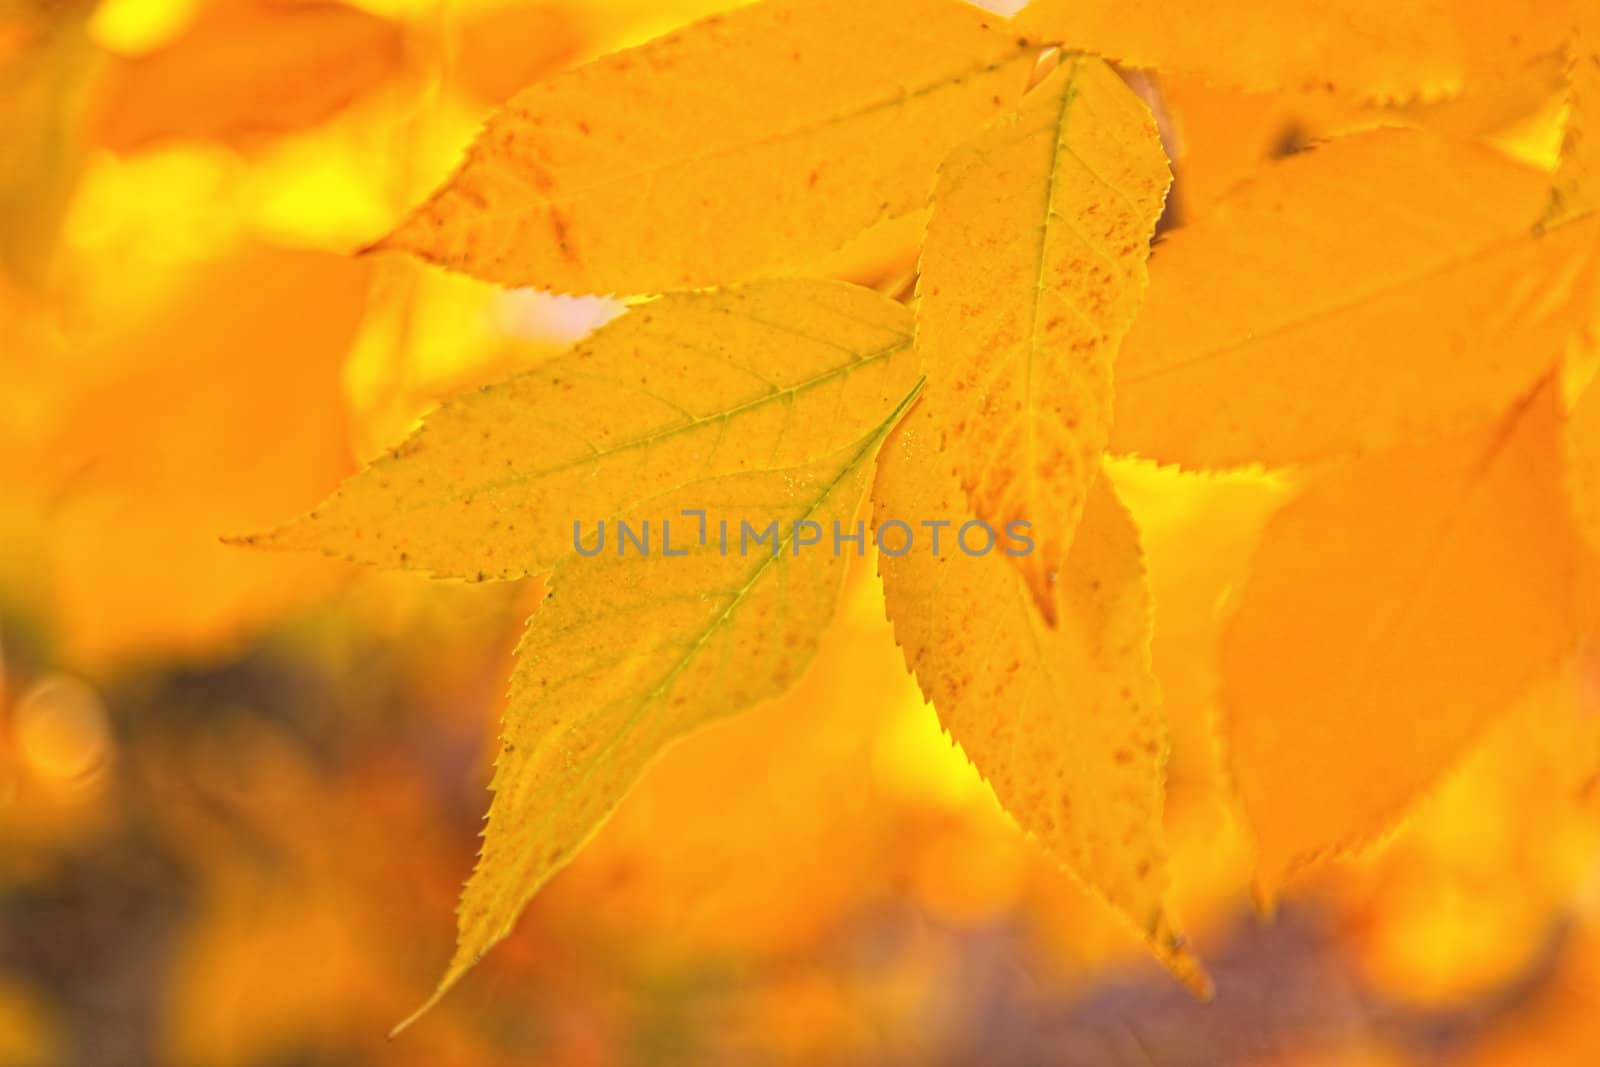 Bright Yellow Ash Leaves in Autumn Sunshine by Auldwhispers